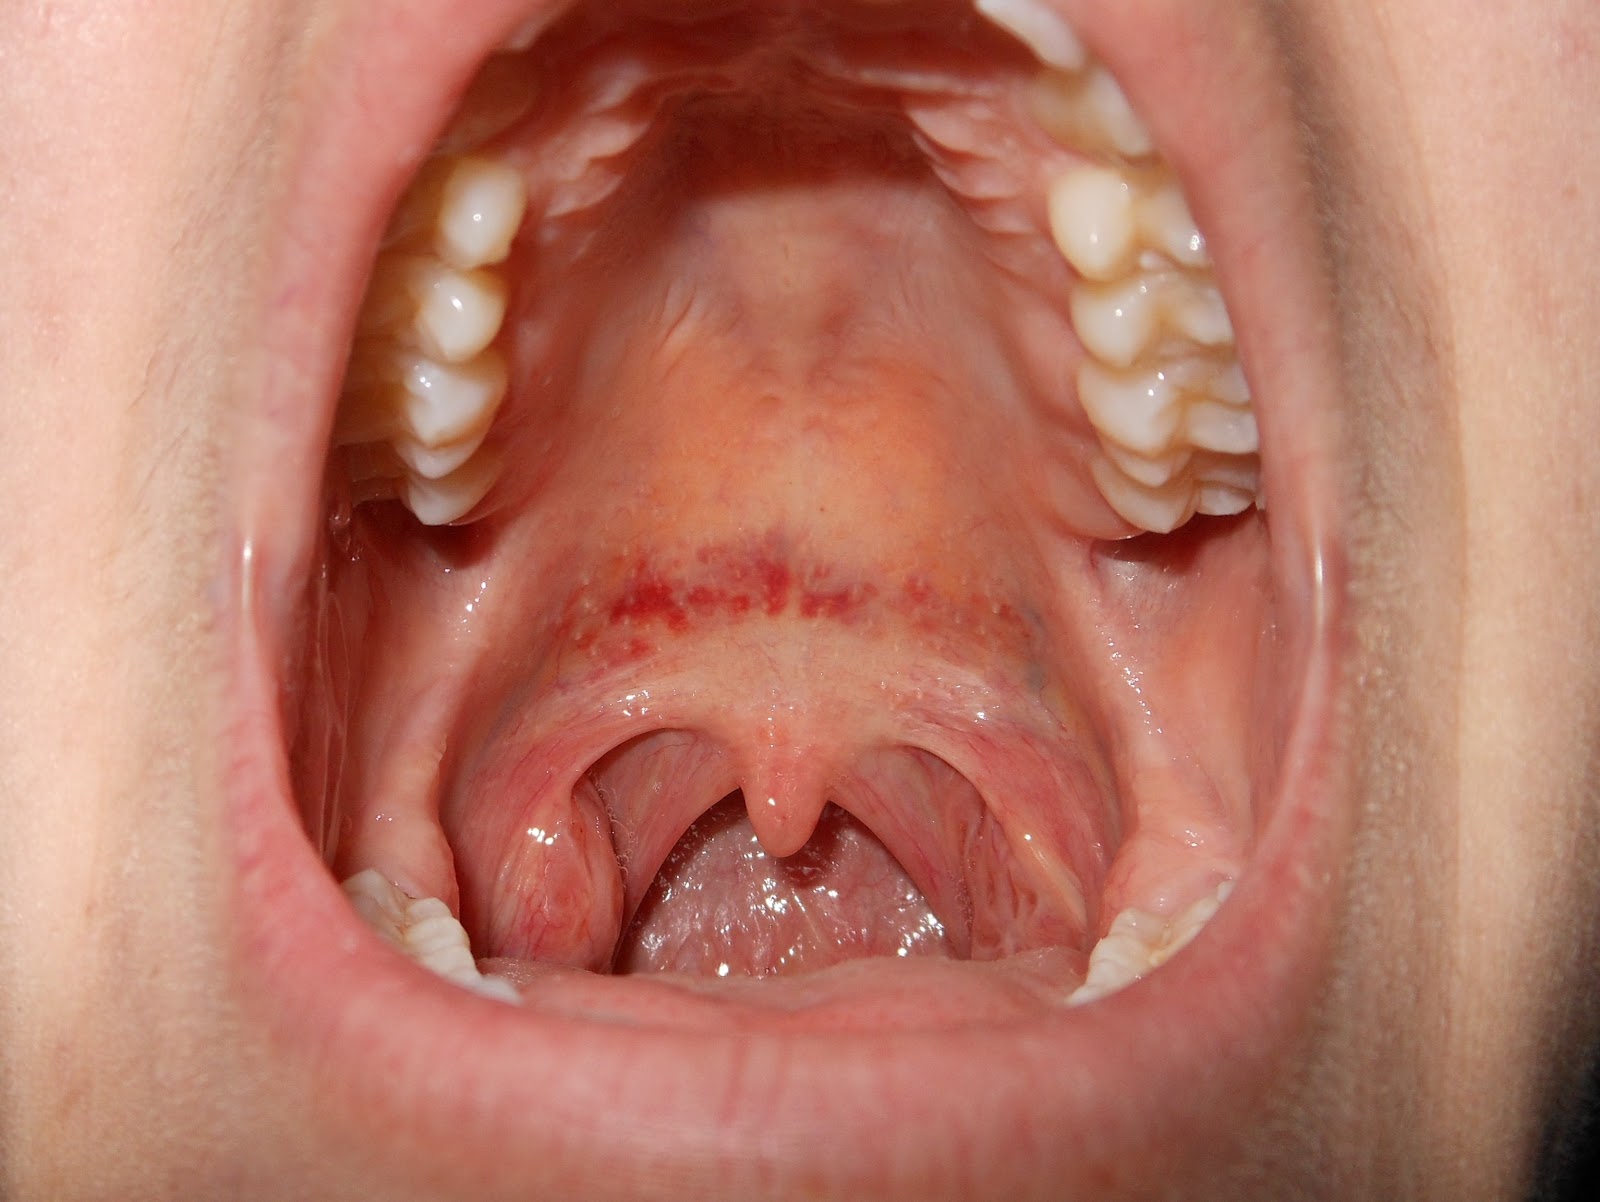 Rash Around Mouth (Lips) Causes, Pictures, Treatment ...